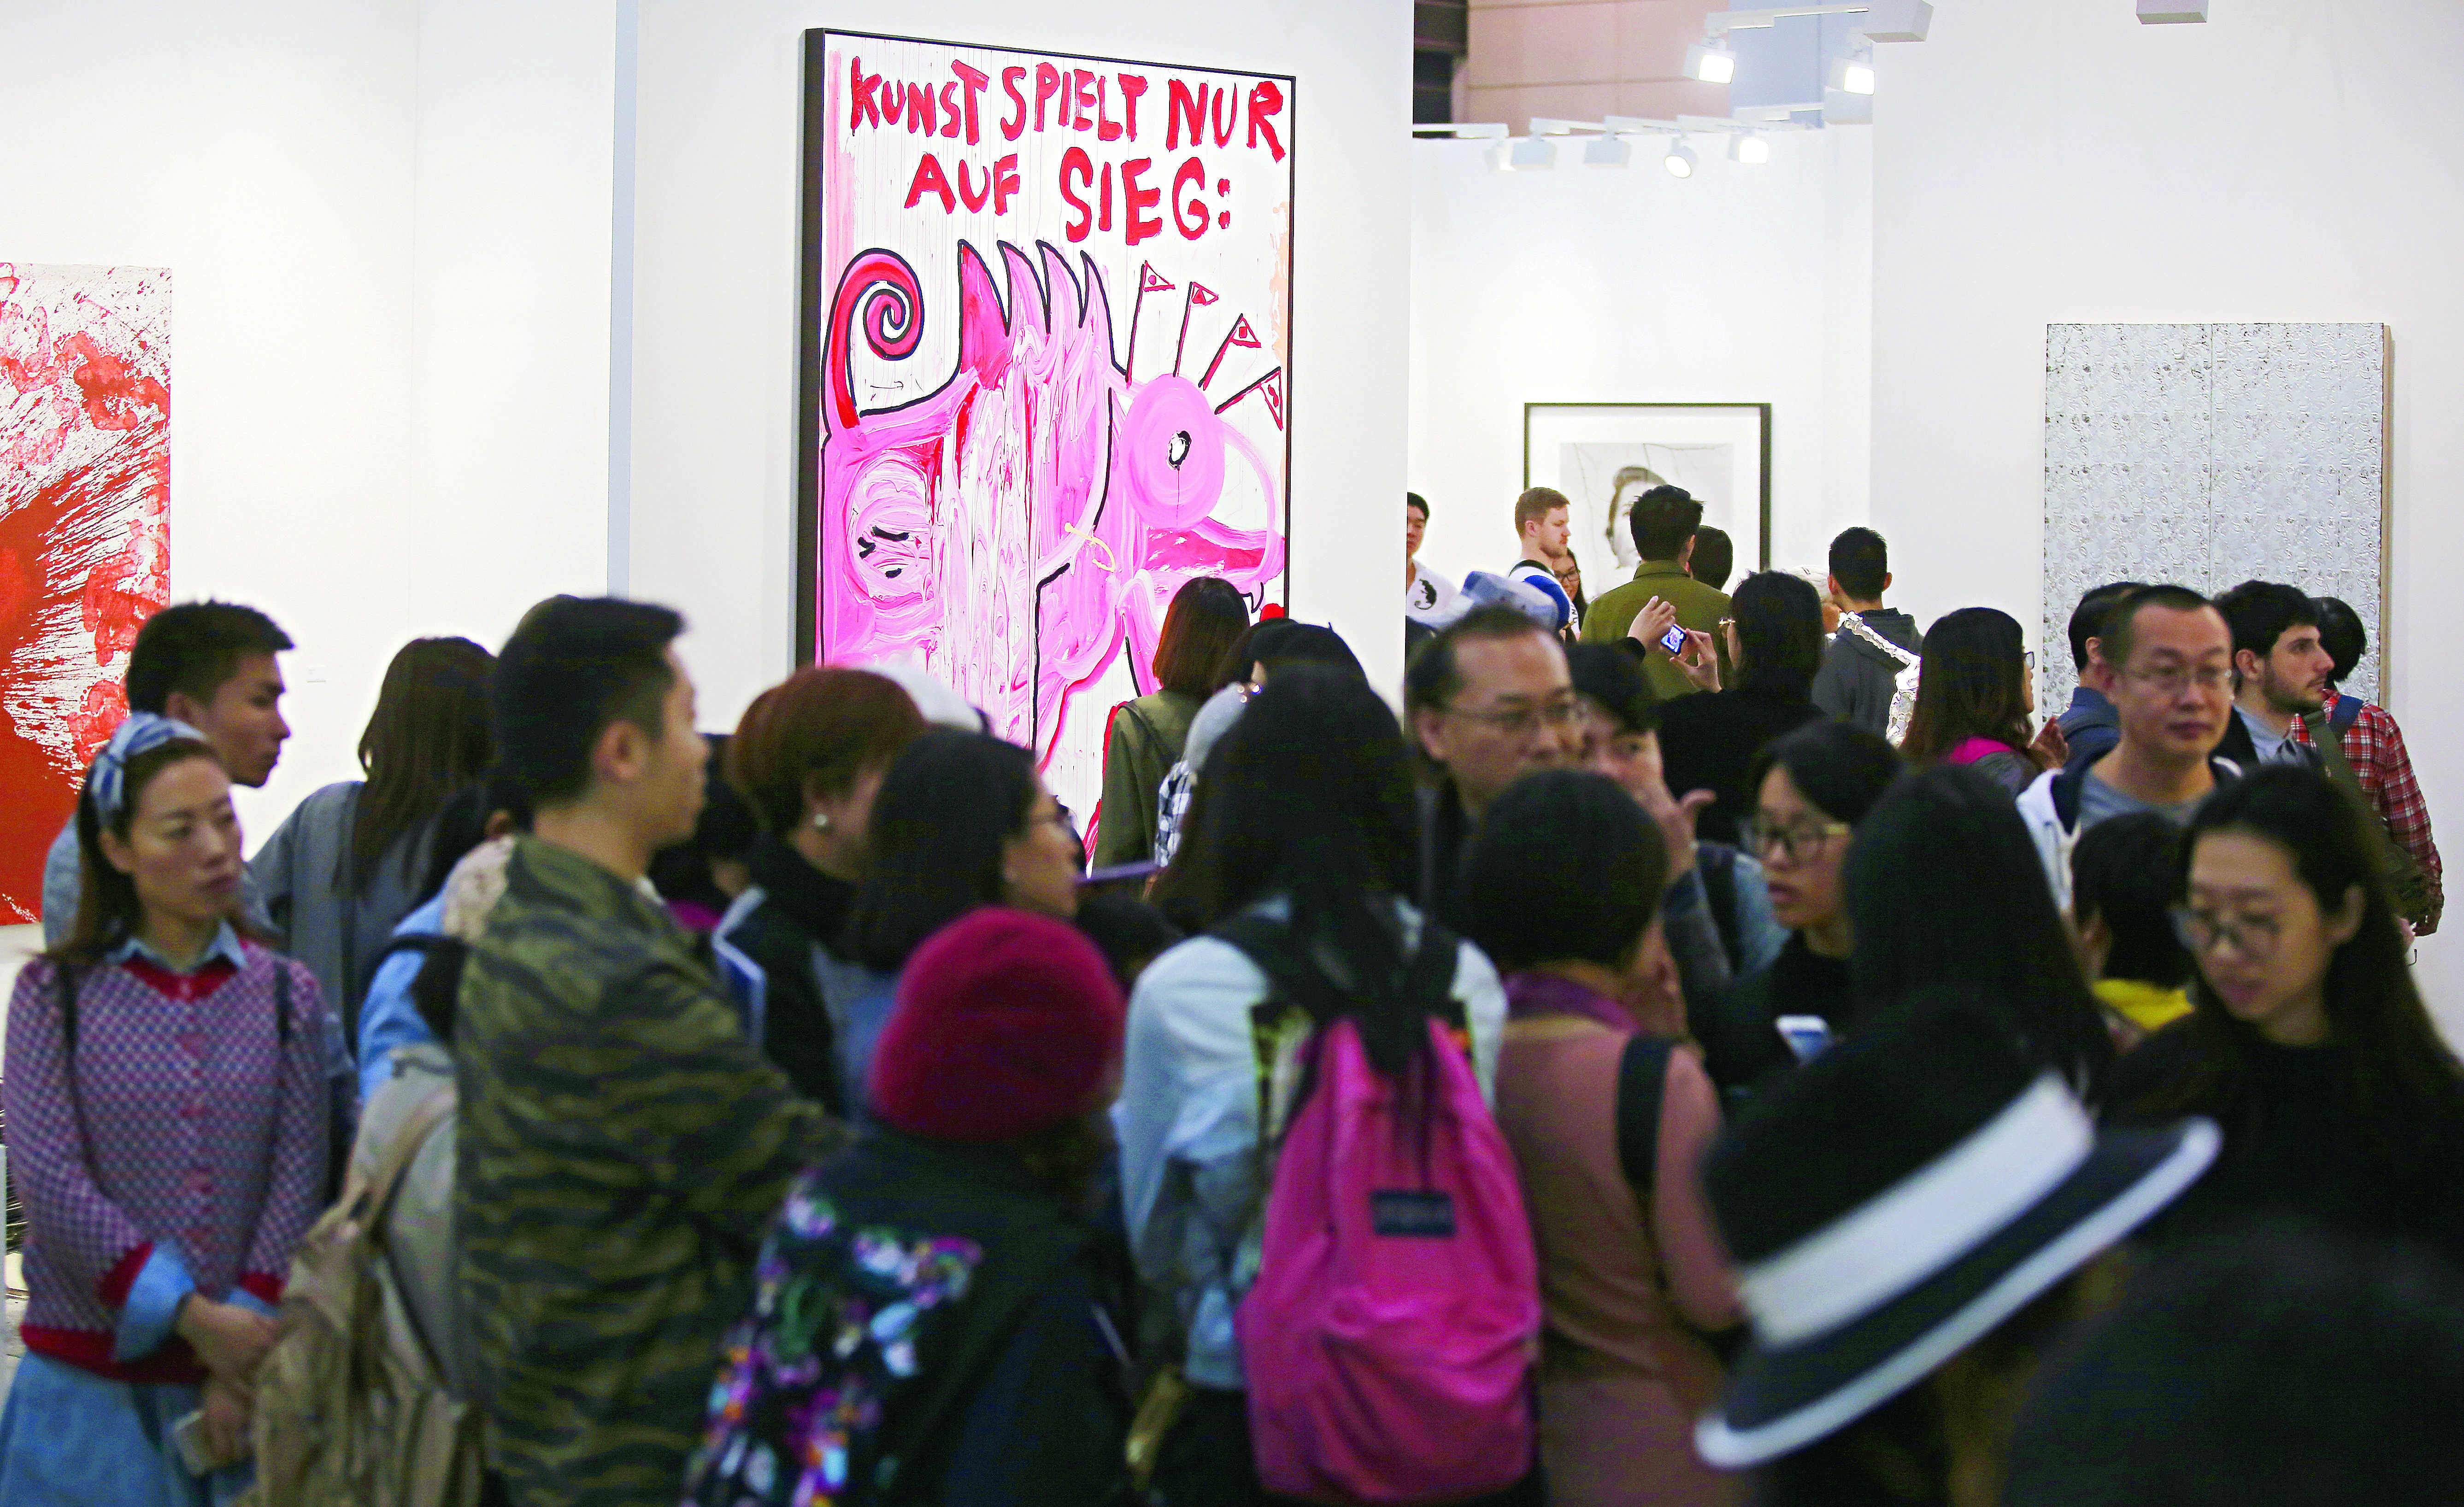 Another packed house yesterday at Art Basel. The doors were closed from about 3pm. Photo: Edward Wong